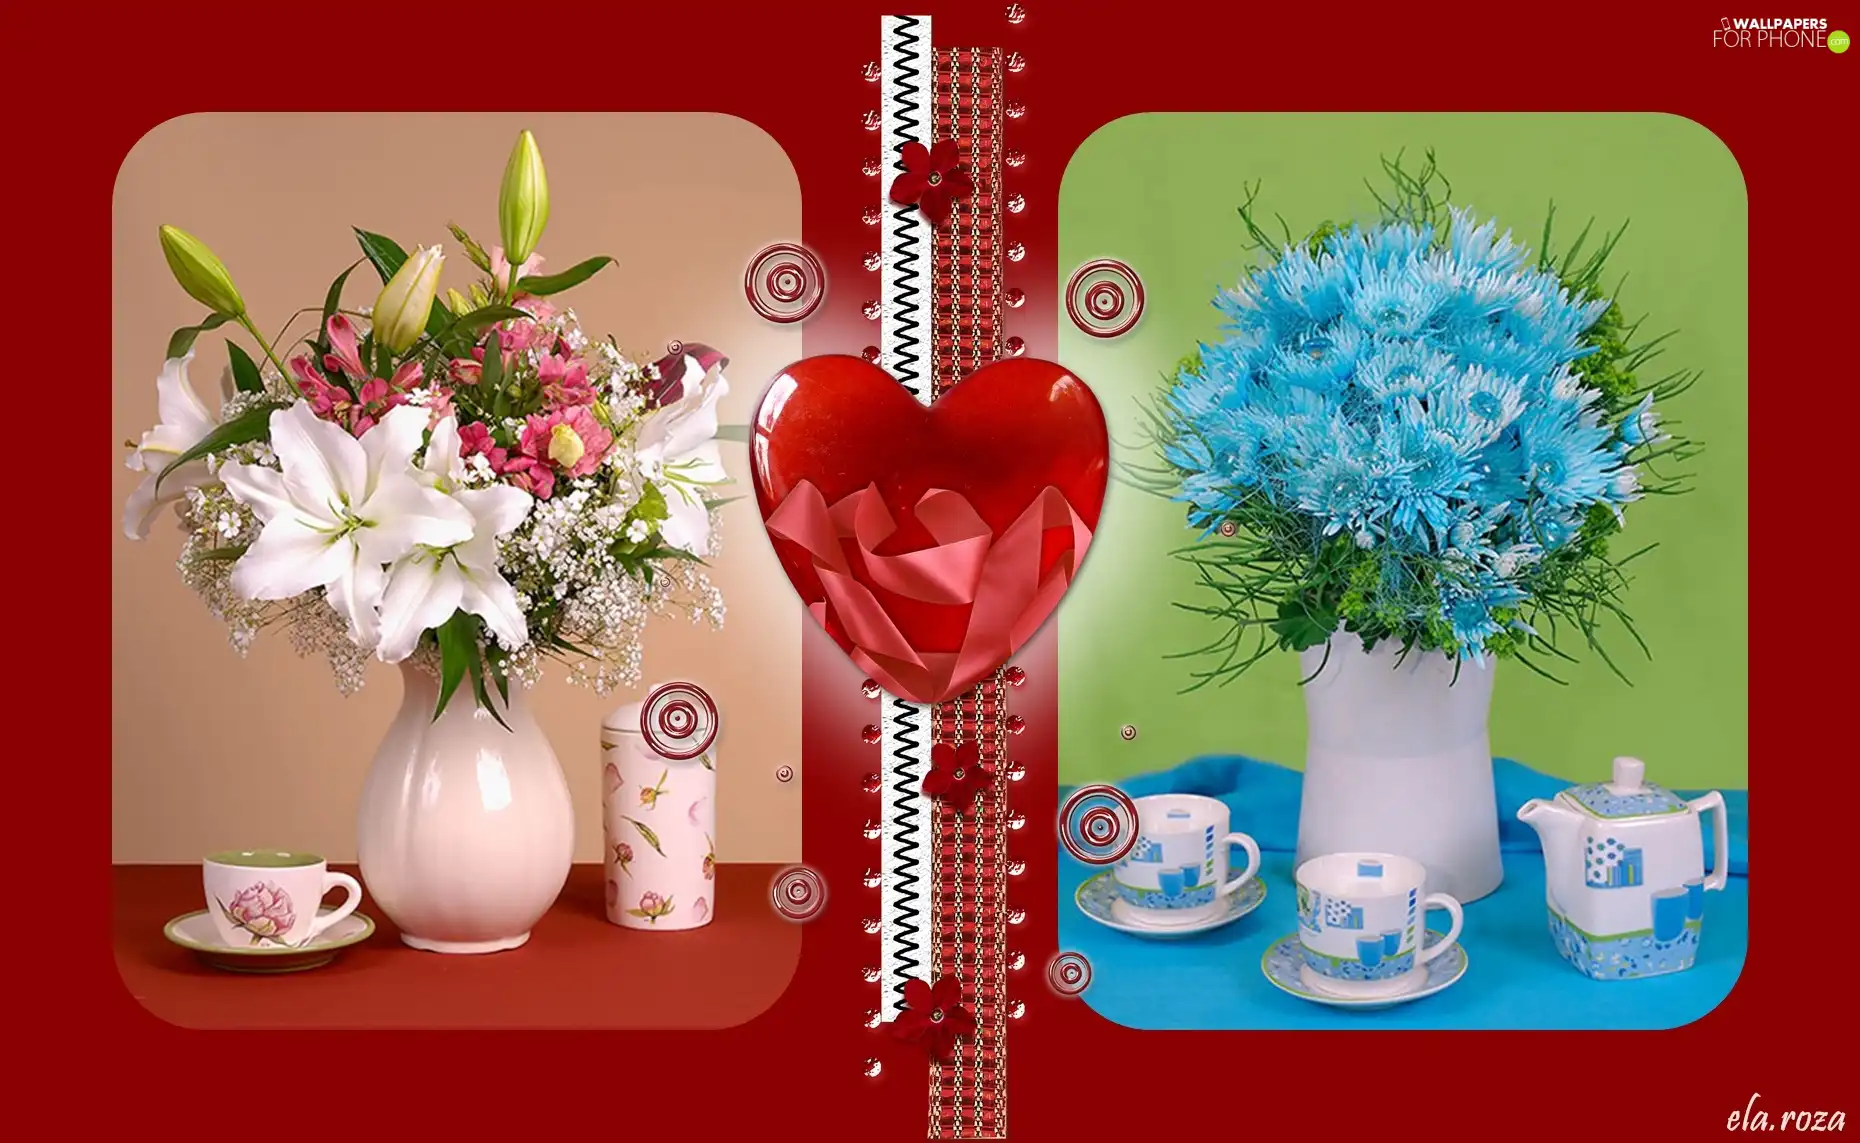 Flowers, Two cars, vase, cups, ##, pictures